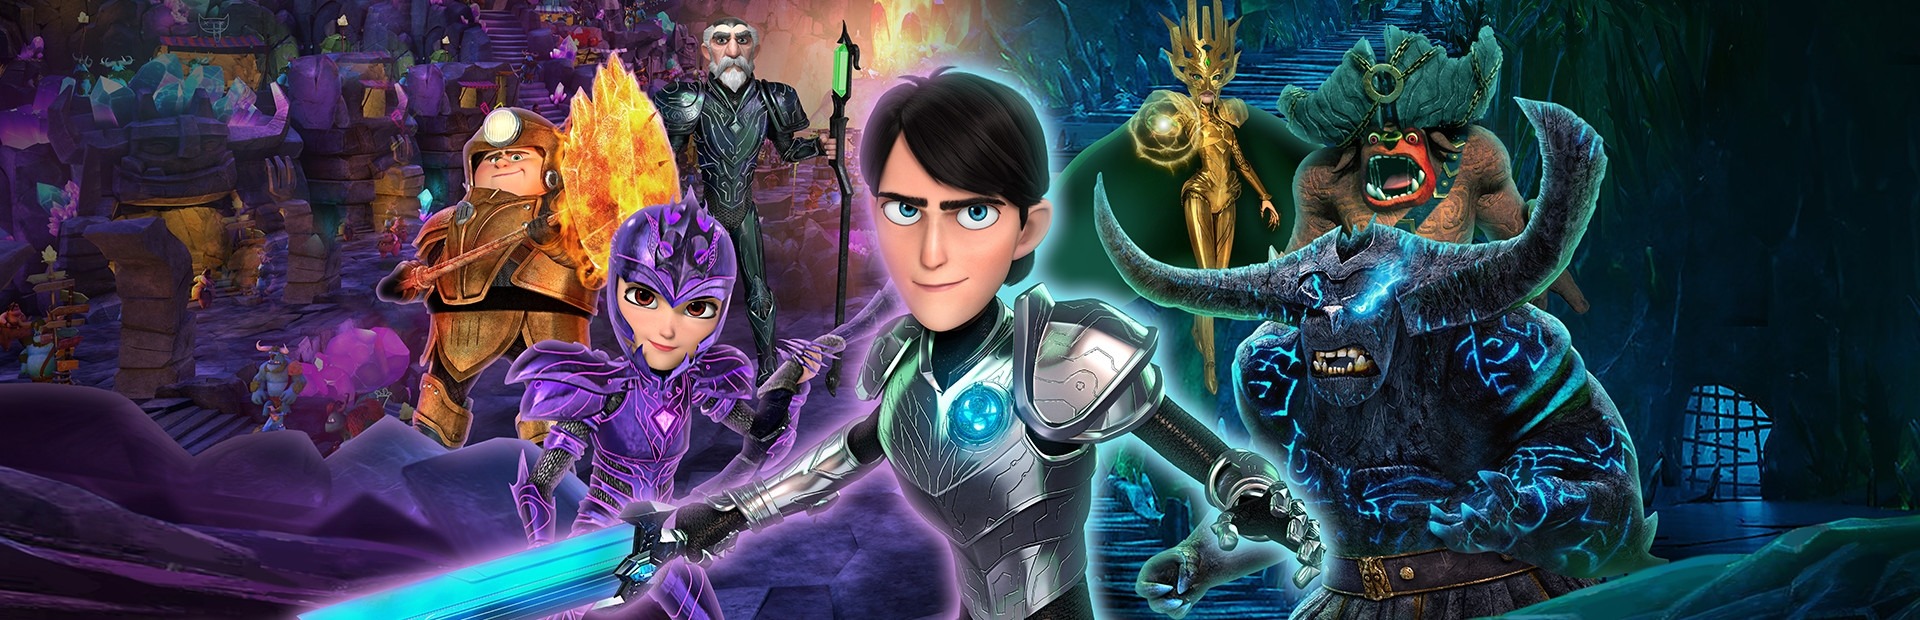 Trollhunters: Defenders of Arcadia Switch